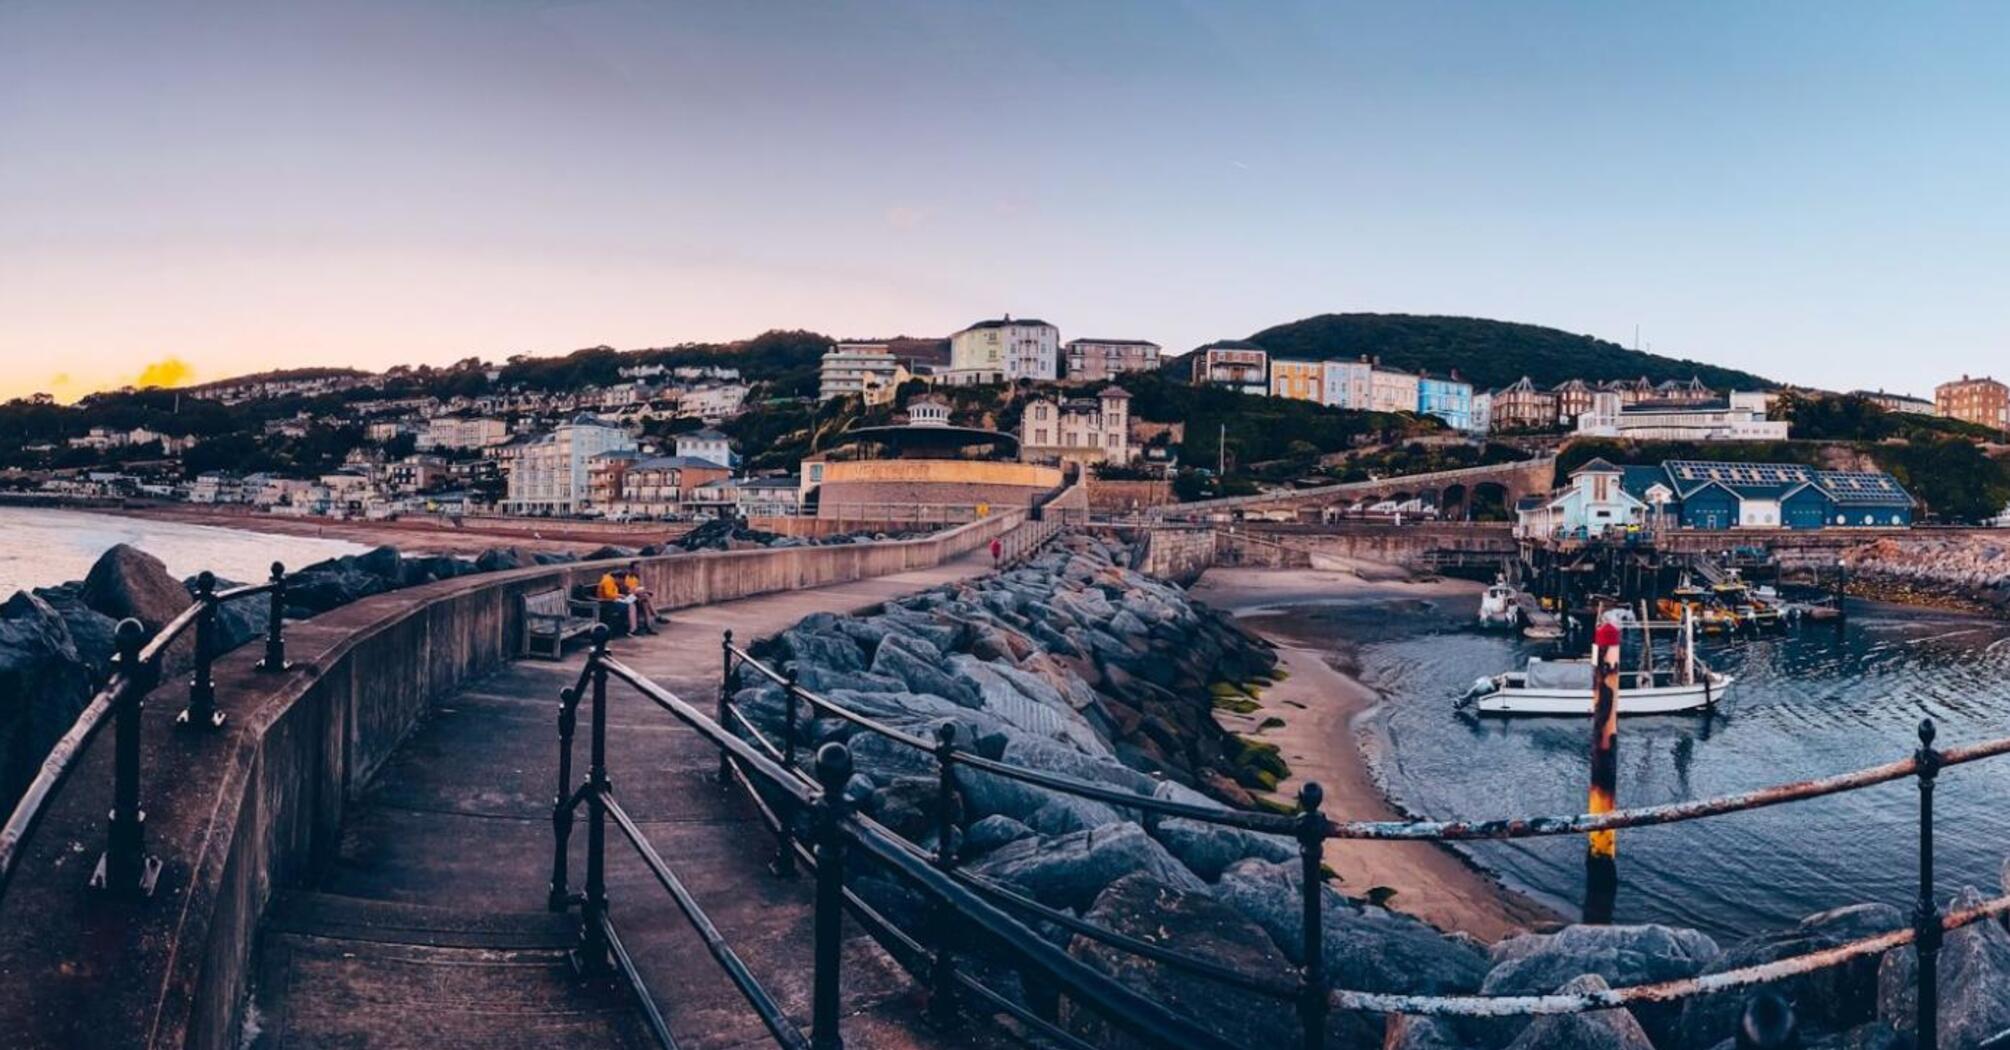 Scenic view of Ventnor Town with a coastal walkway at sunset